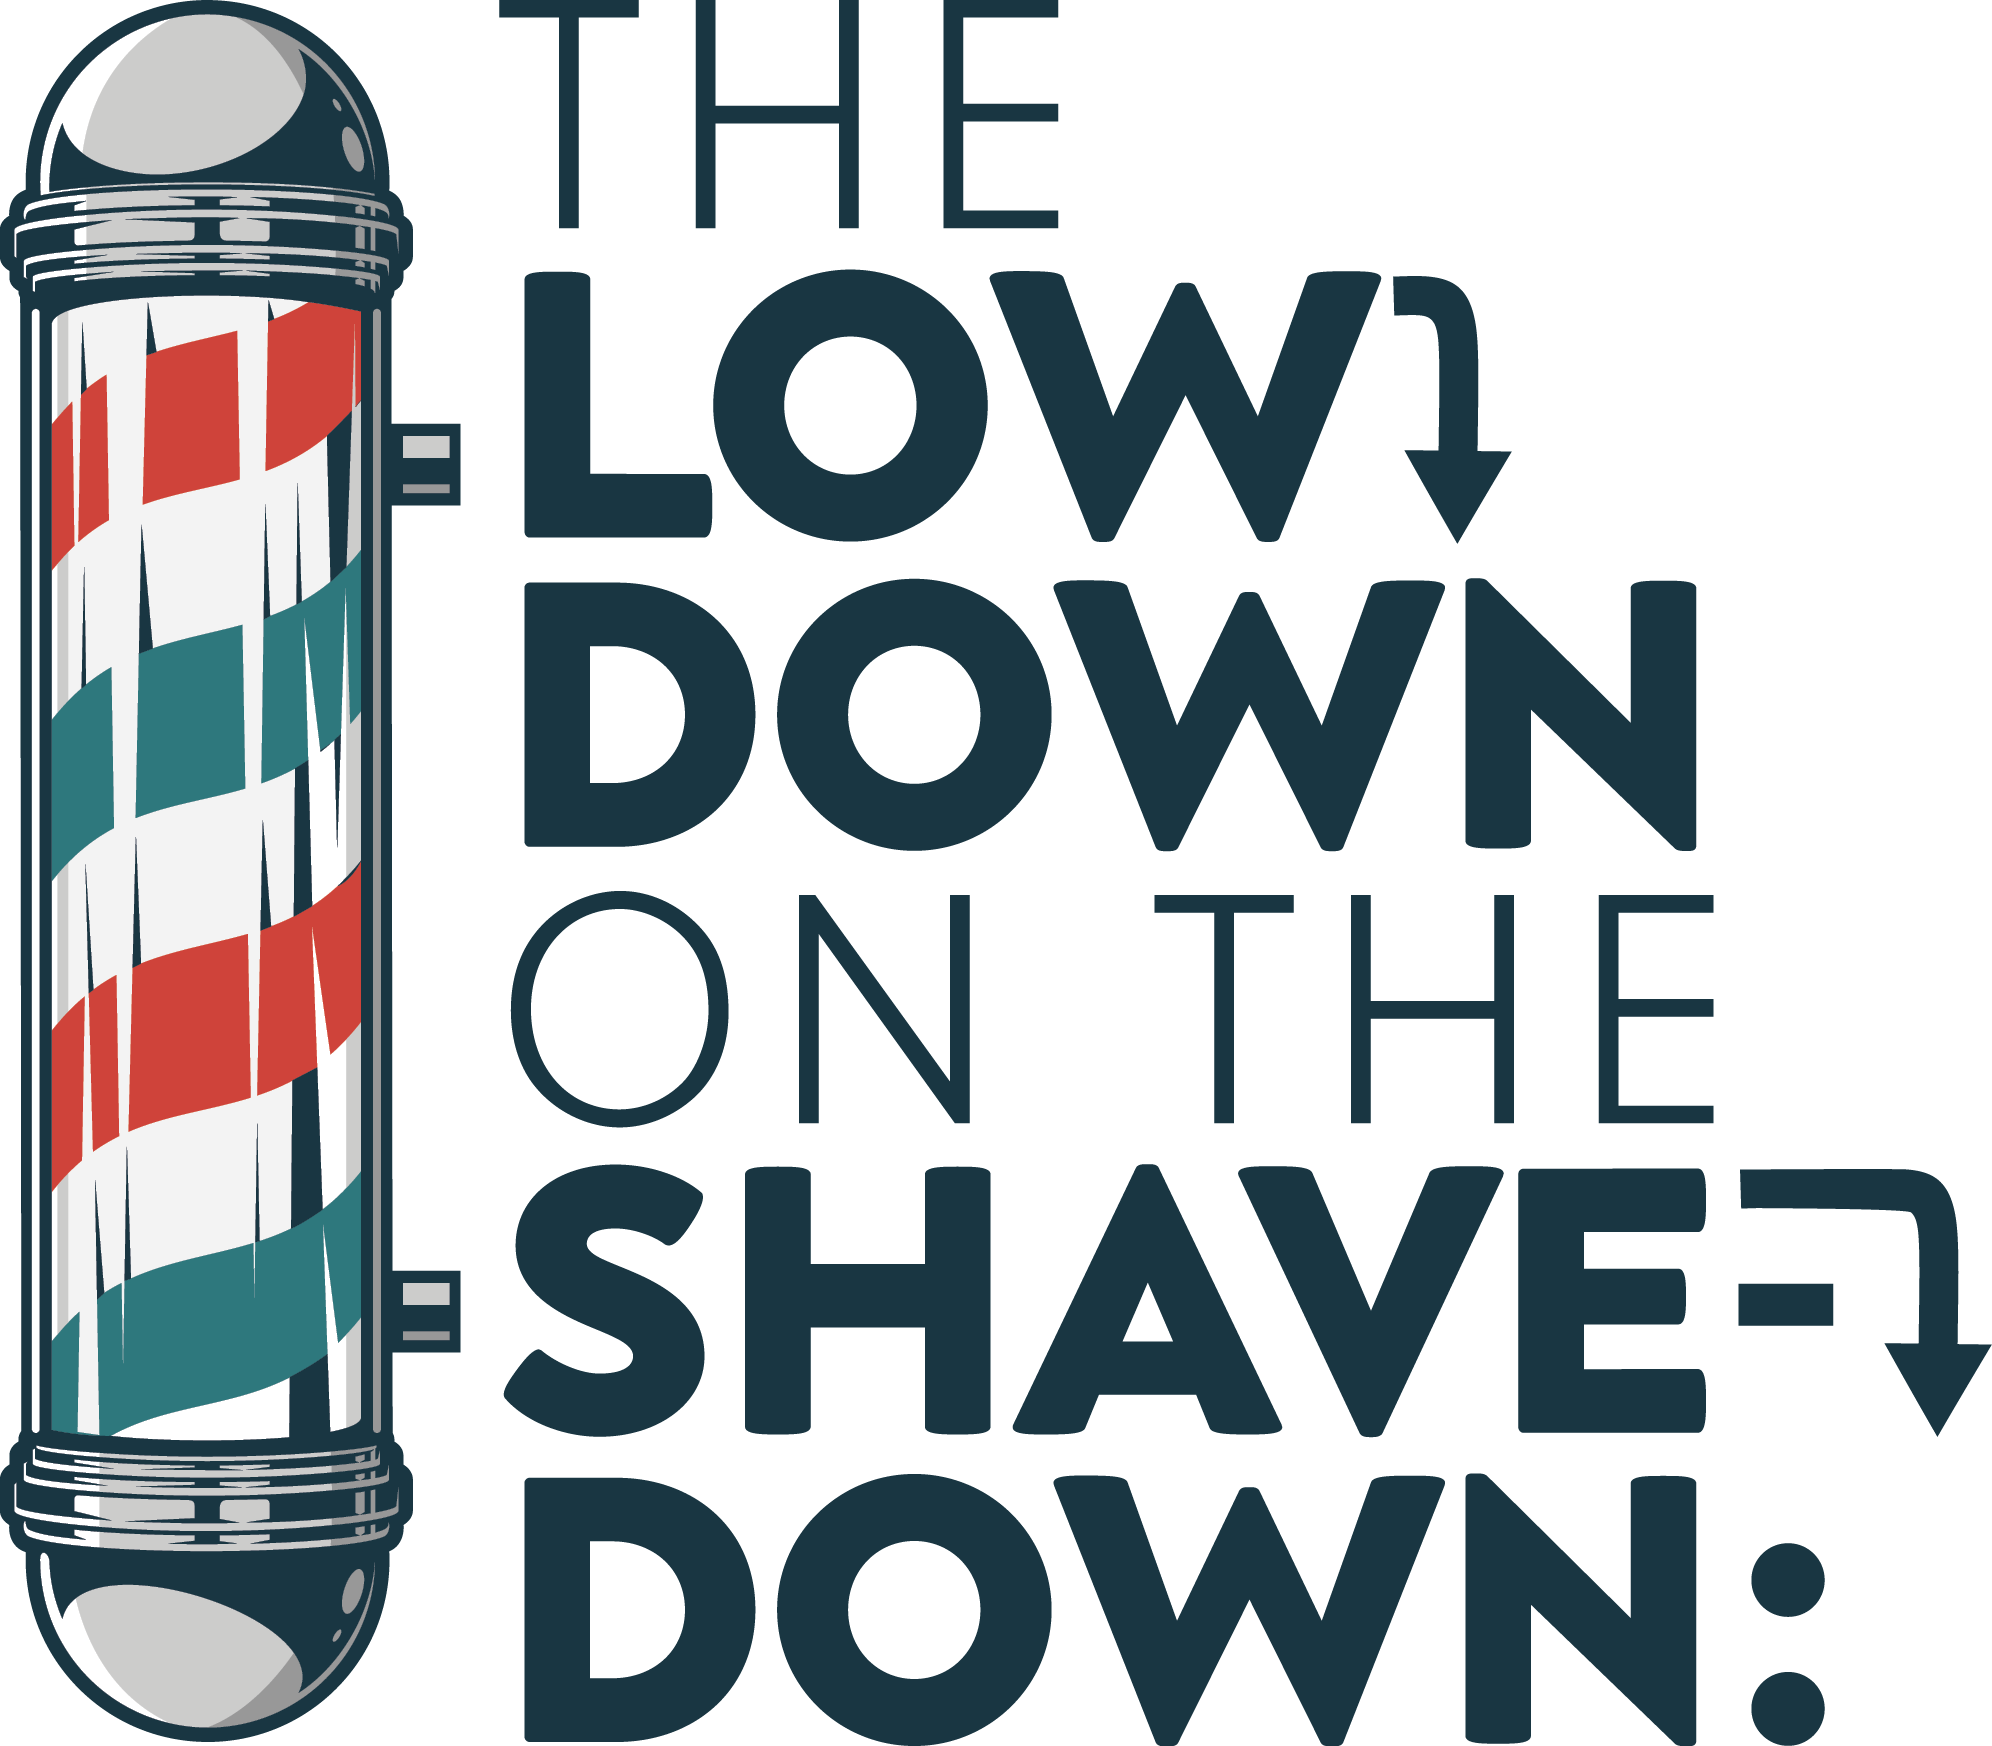 "The Low Down on the Shave Down" and barber pole